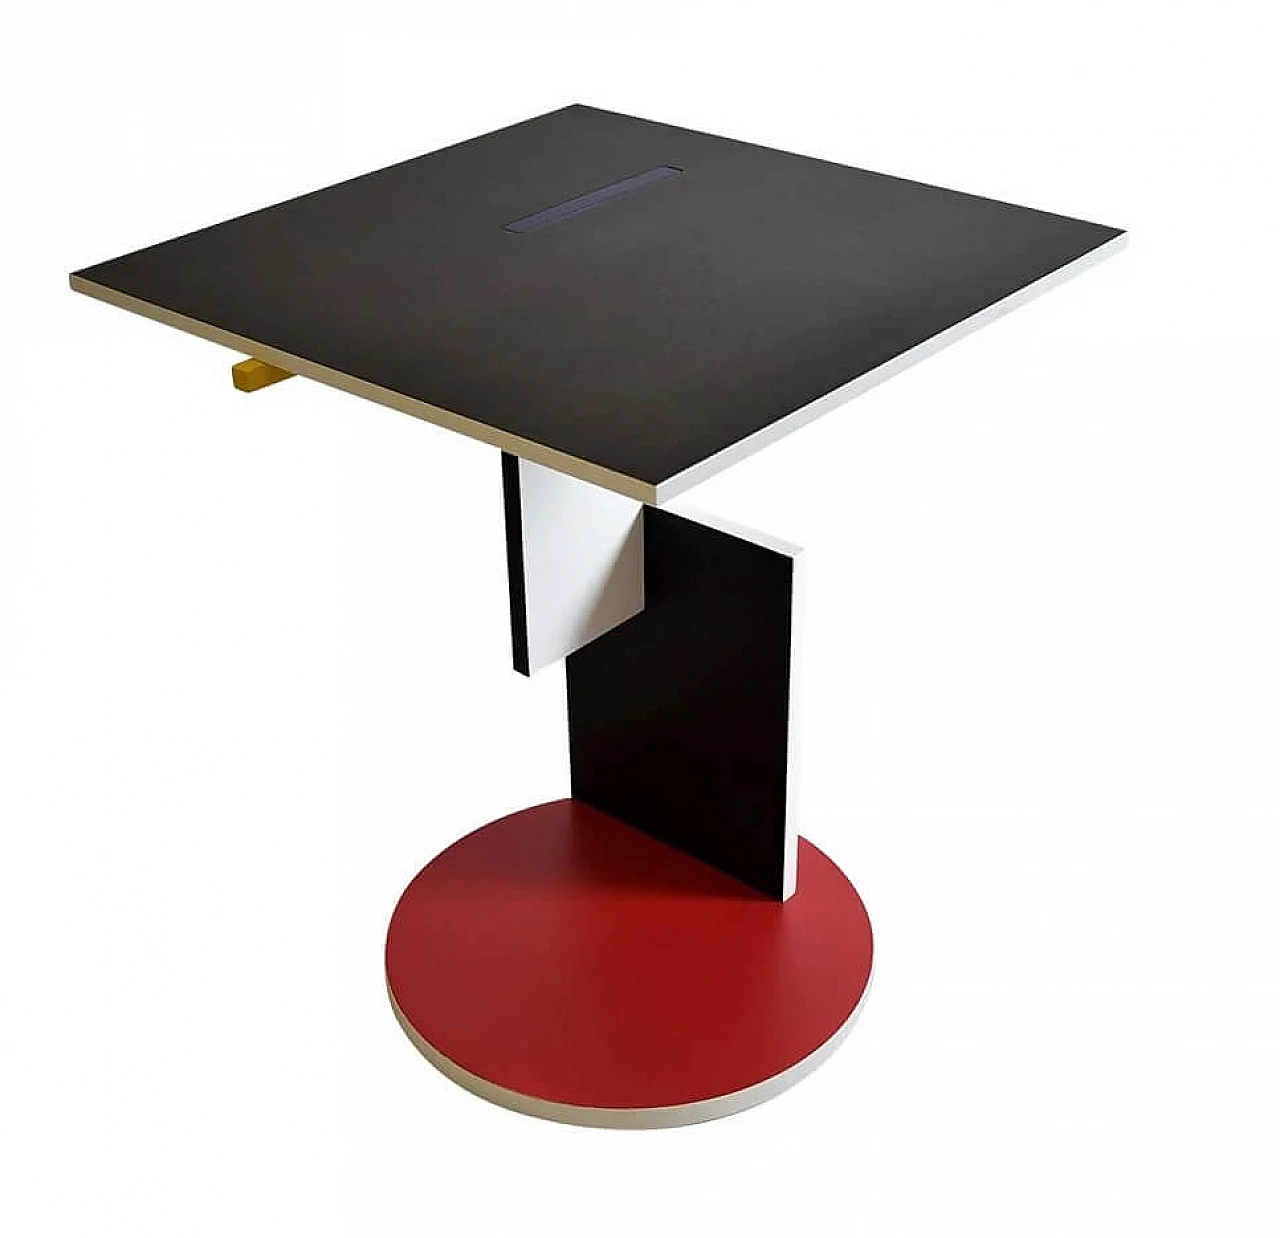 Schroeder 1 coffee table by Gerrit Rietveld for Cassina, 1970s 9